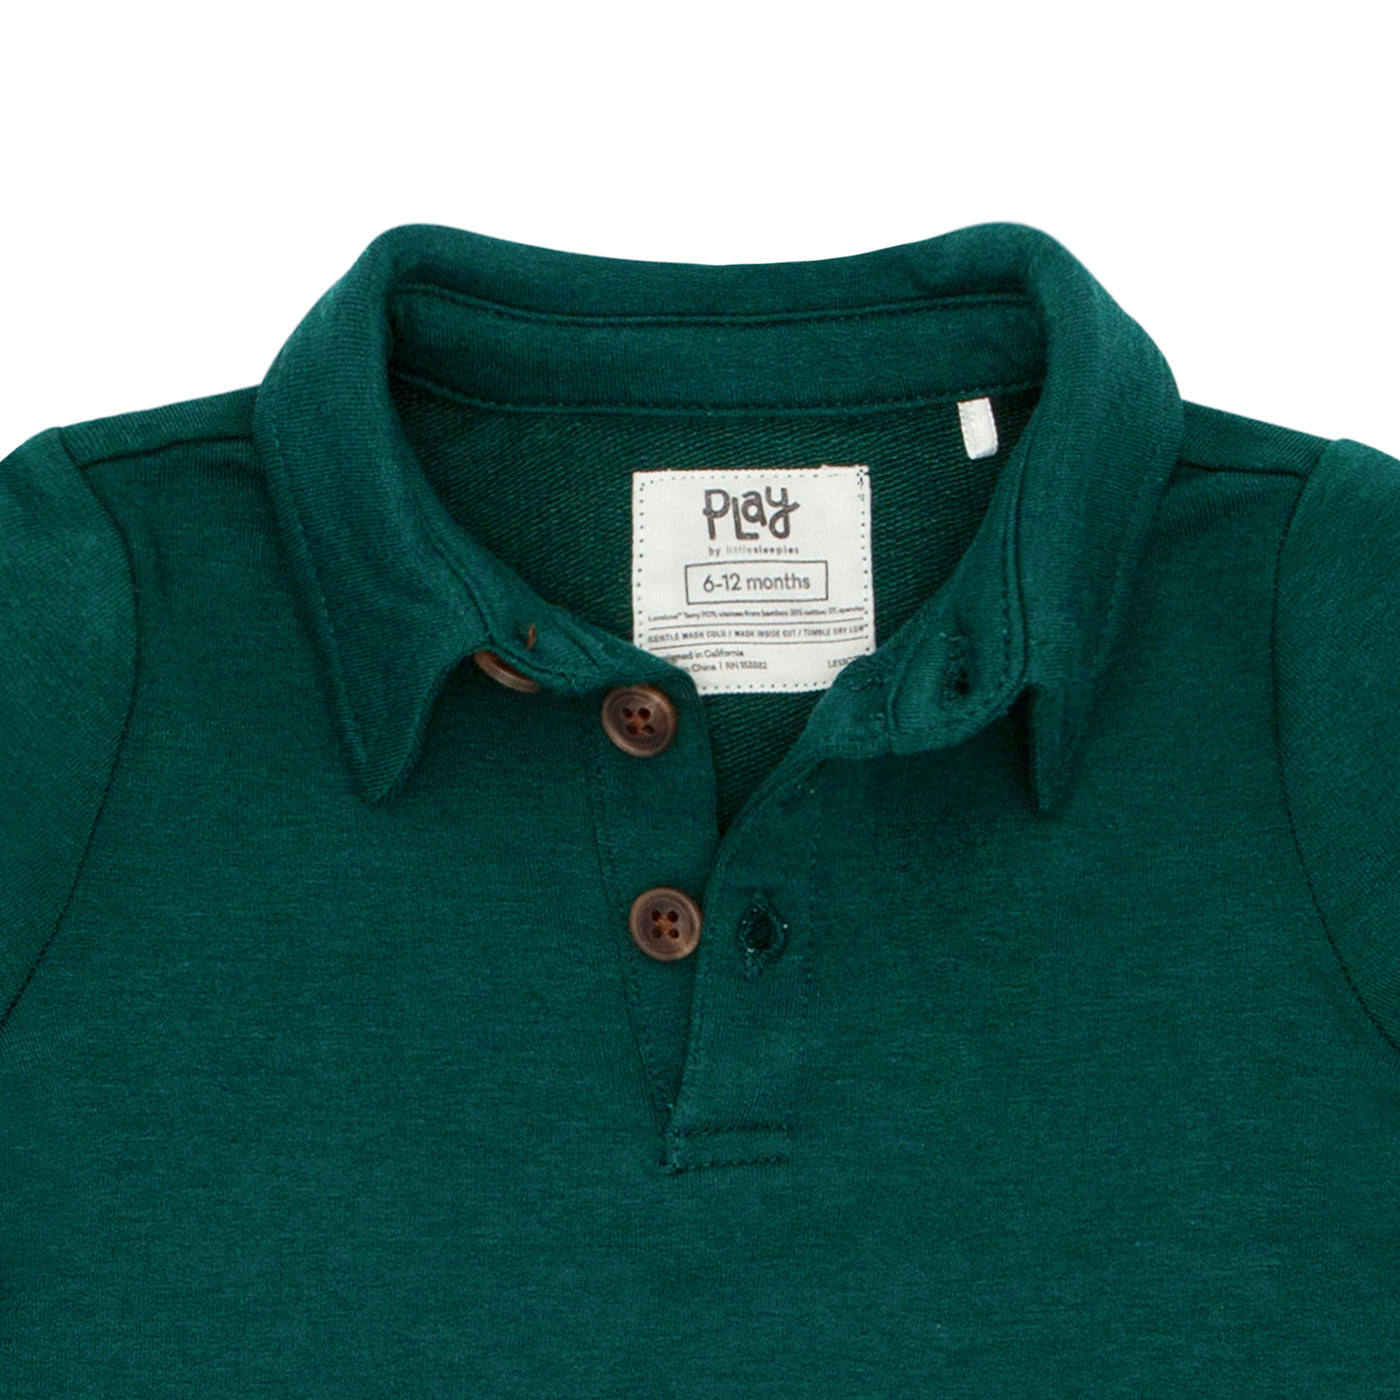 Close up detail image of the buttons on an Emerald polo shirt